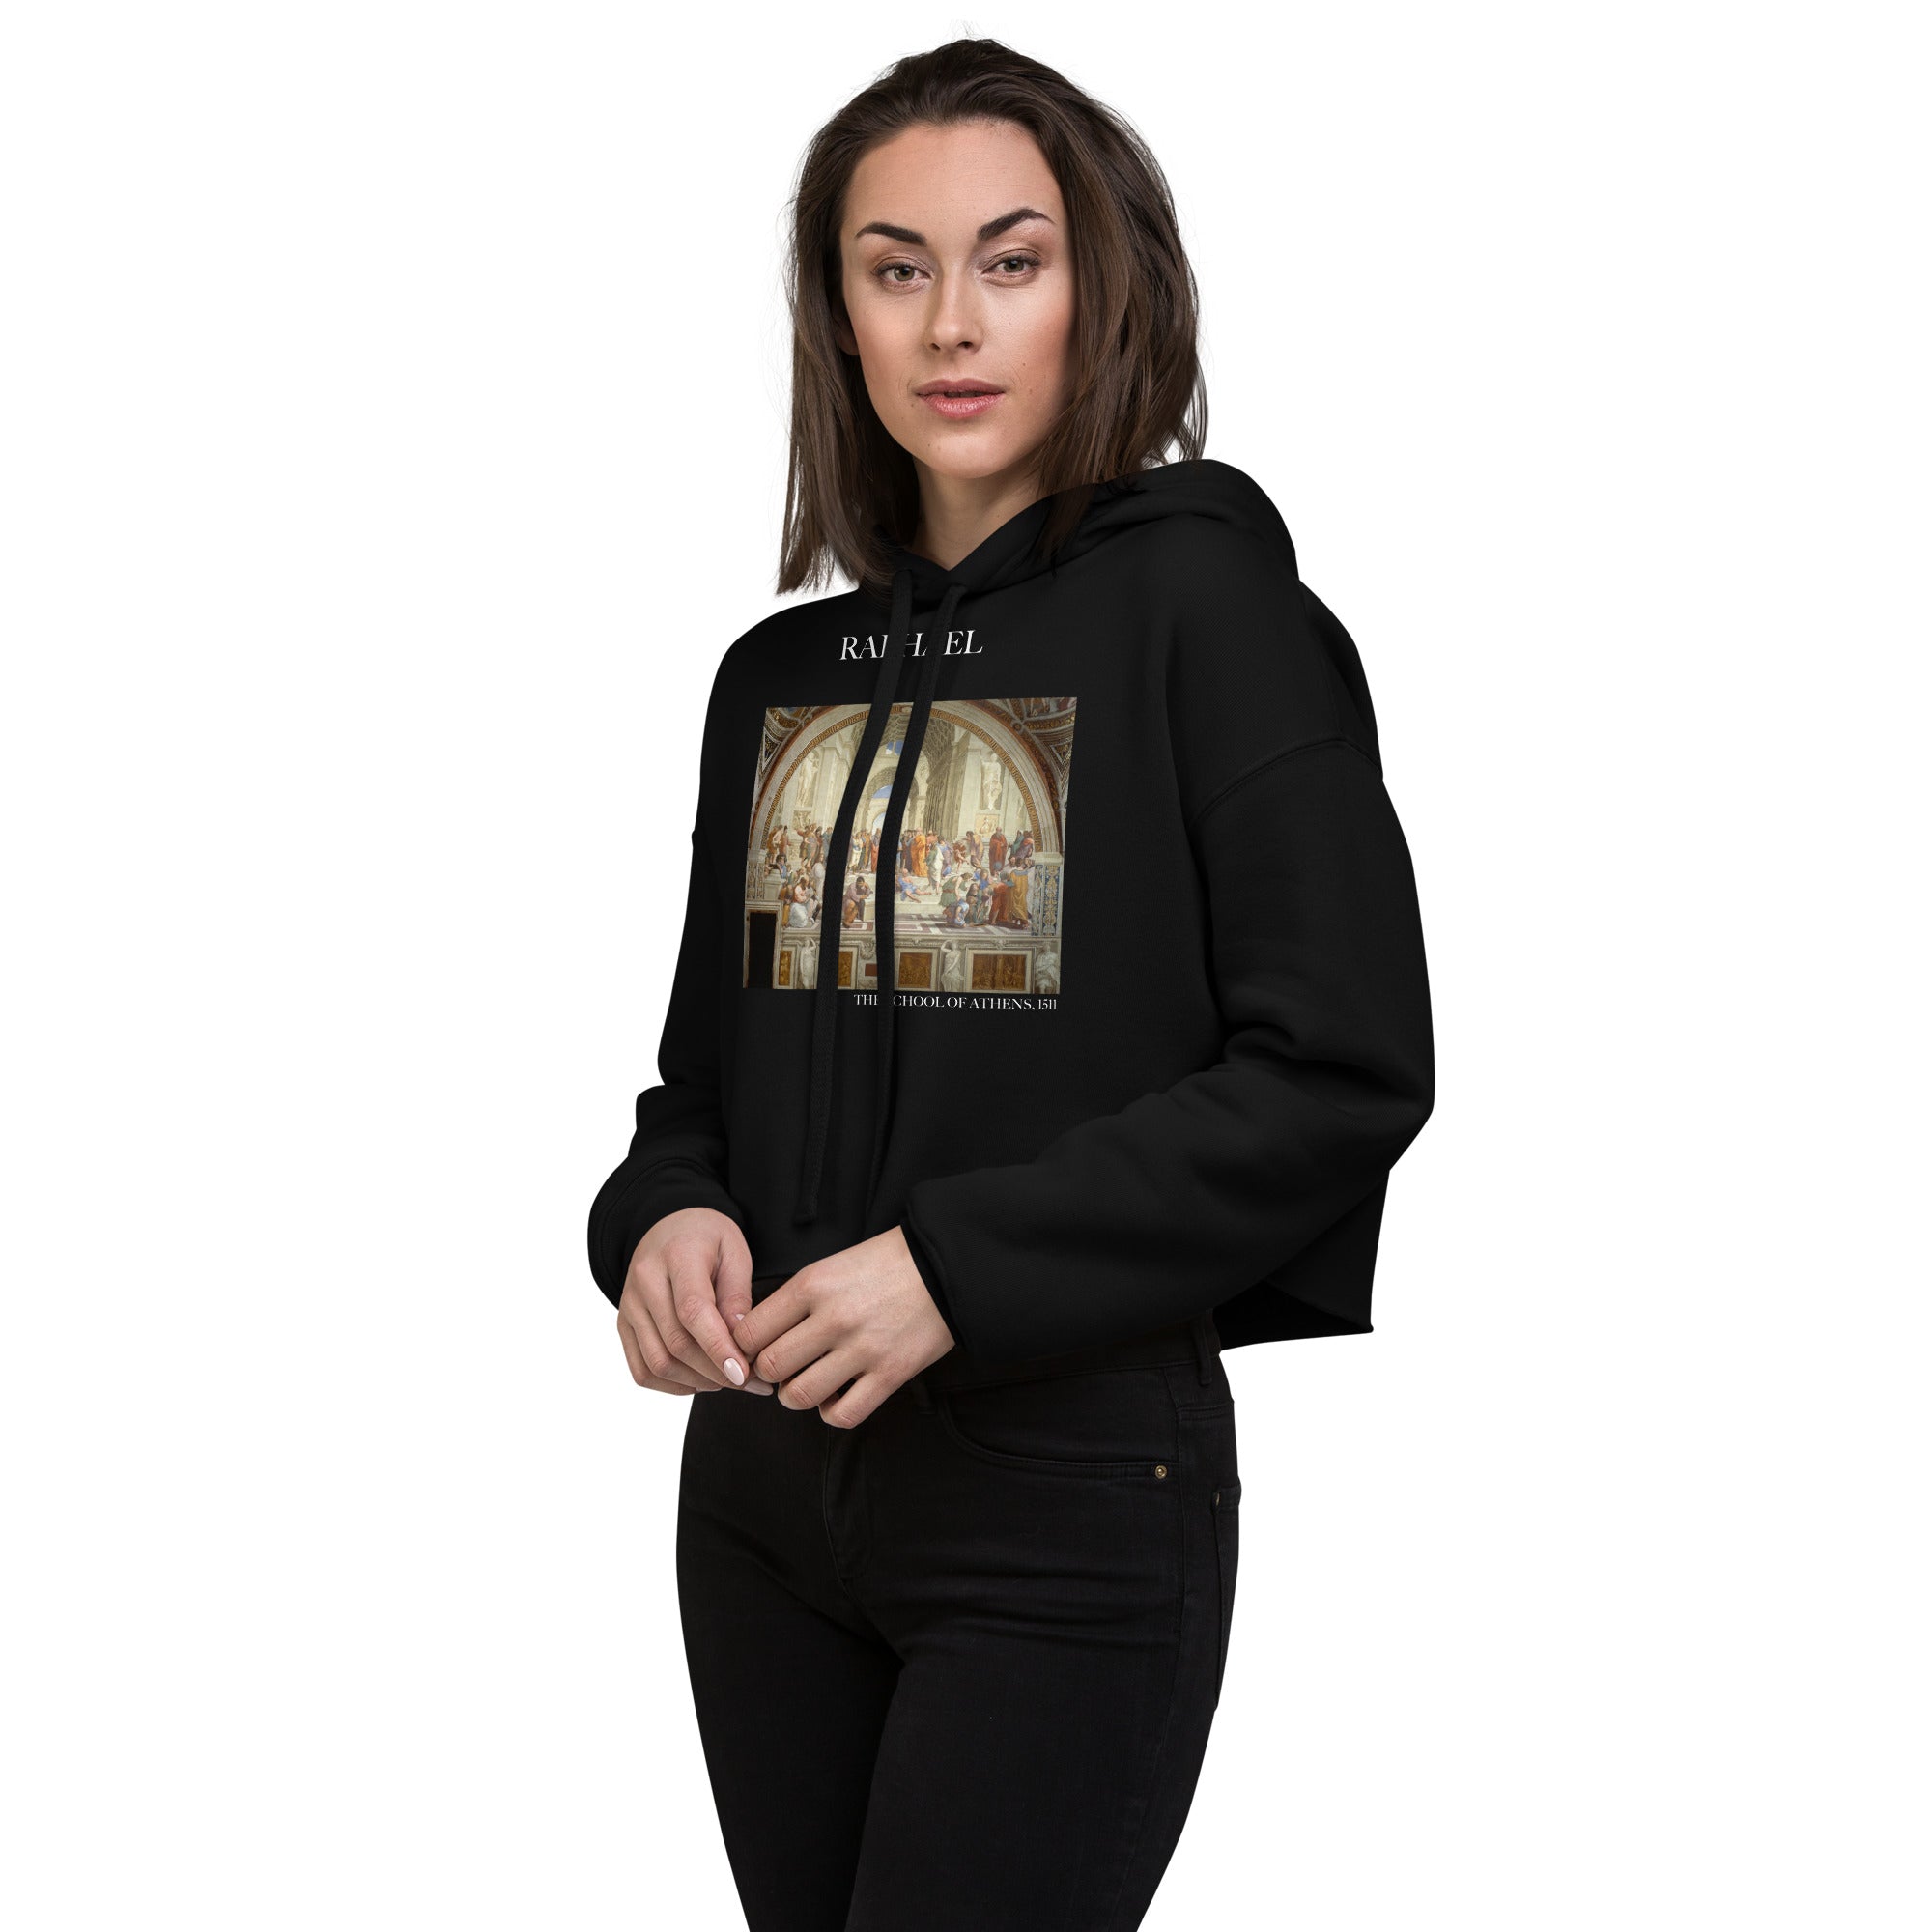 Raphael 'The School of Athens' Famous Painting Cropped Hoodie | Premium Art Cropped Hoodie